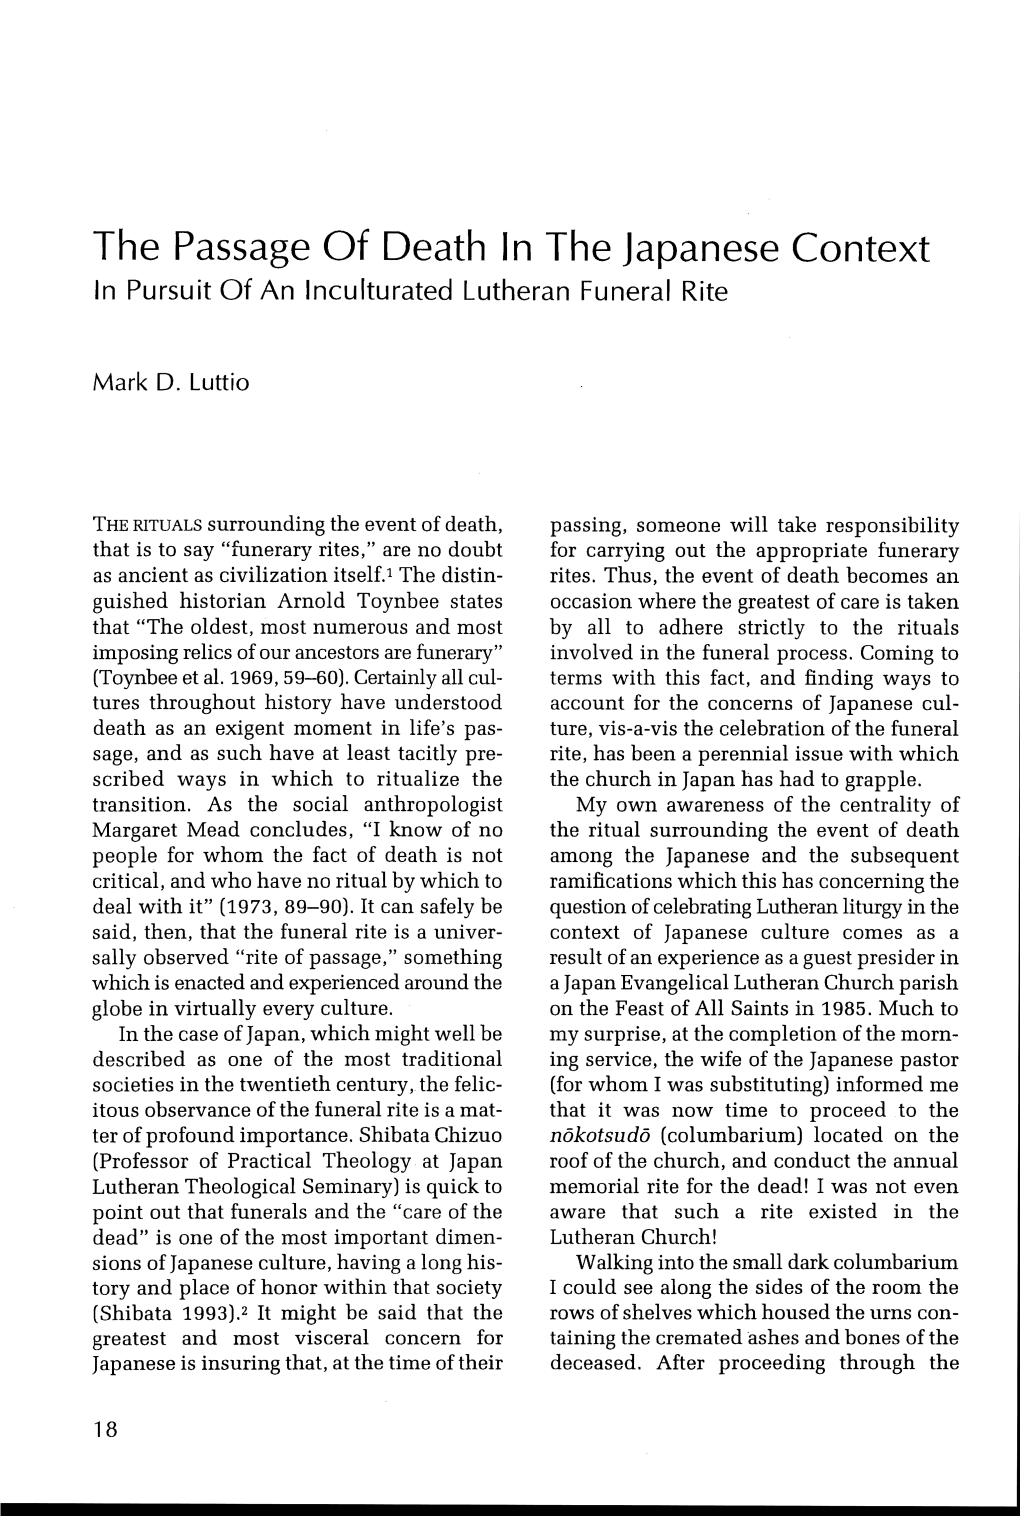 The Passage of Death in the Japanese Context in Pursuit of an Lnculturated Lutheran Funeral Rite